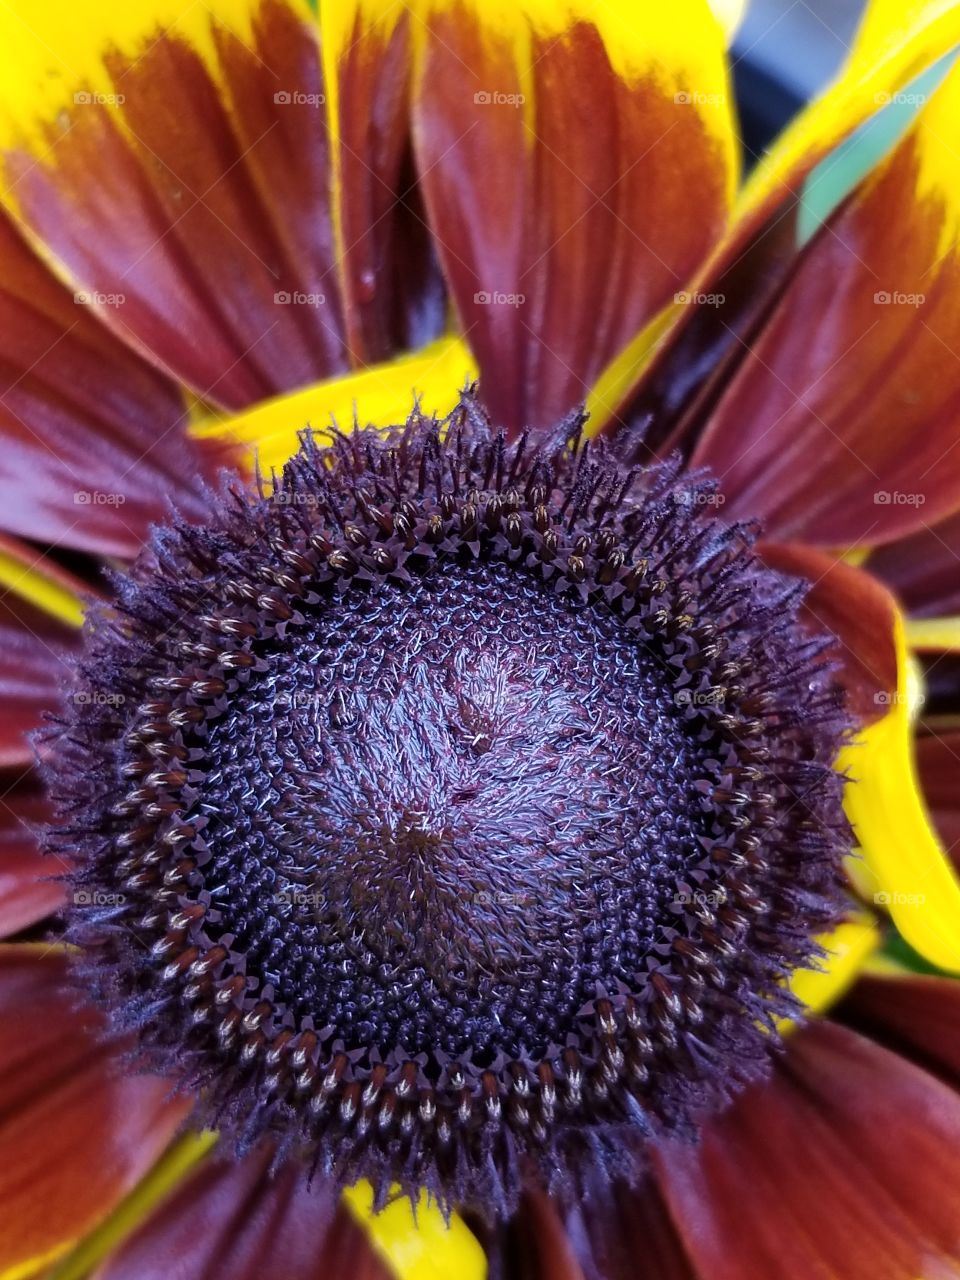 The Center of my Flower